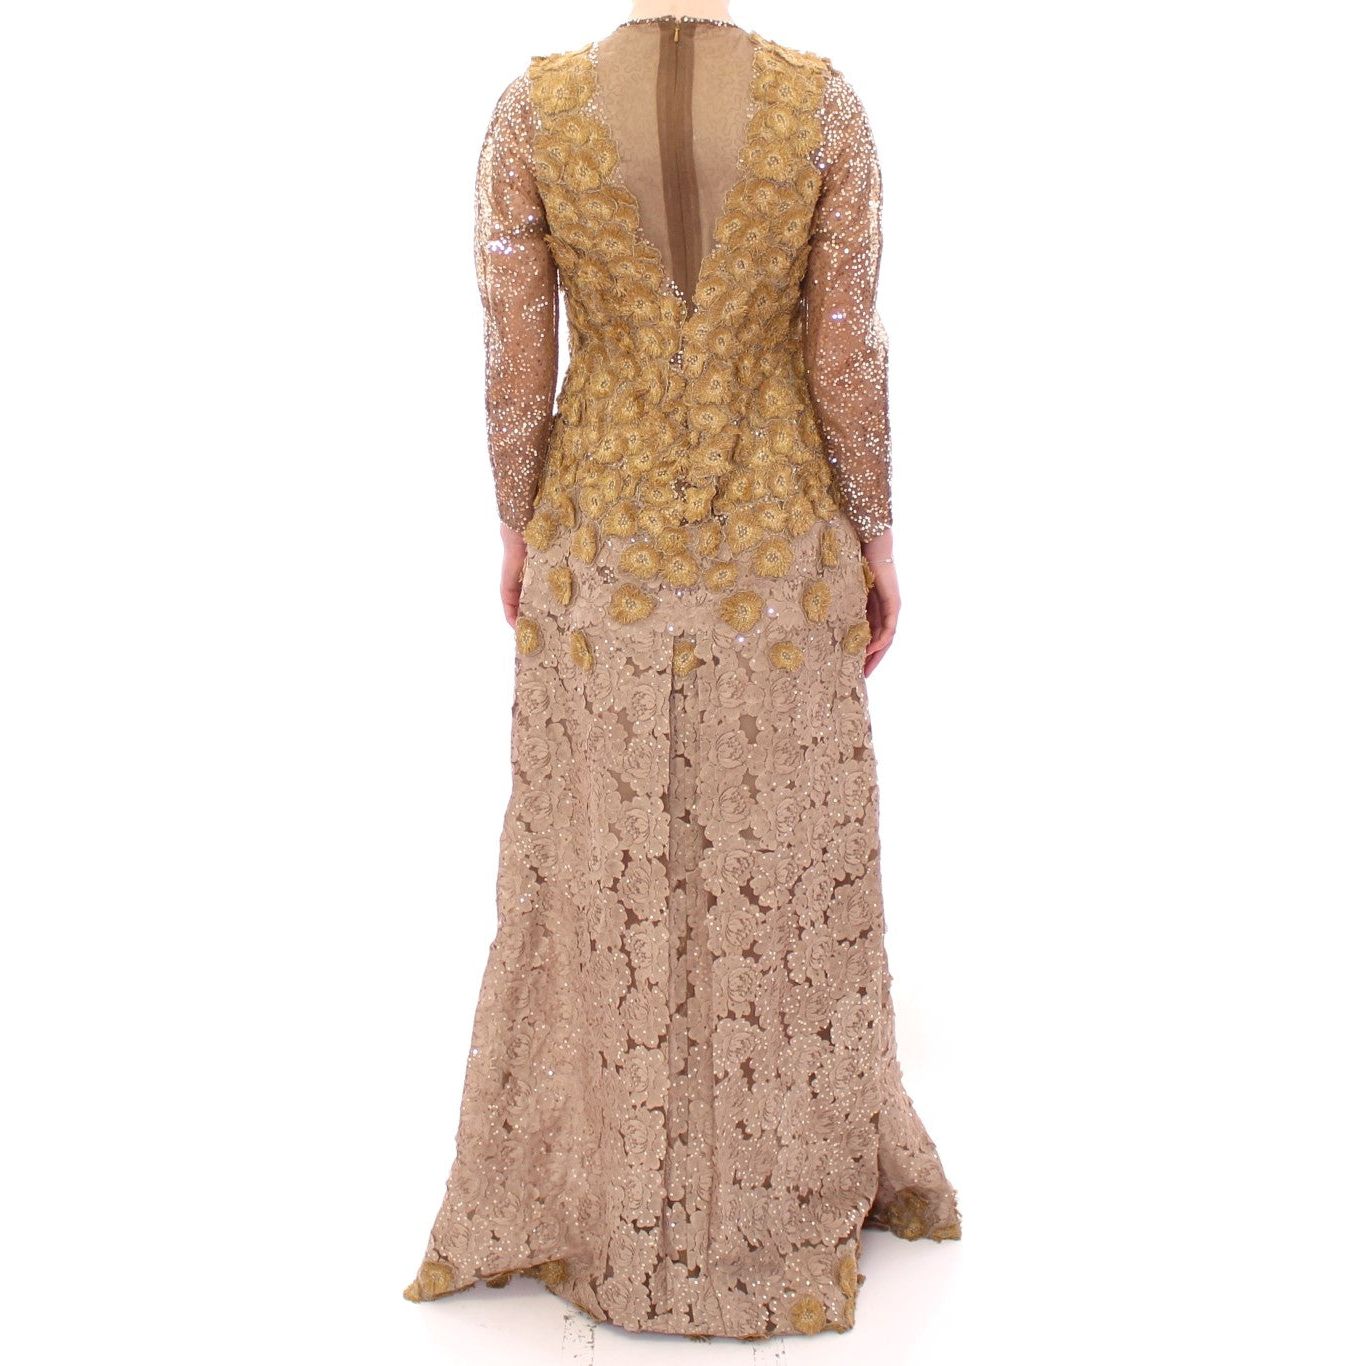 Lanre Da Silva Ajayi Exquisite Gold Lace Maxi Dress with Crystals gold-long-lace-maxi-crystal-dress